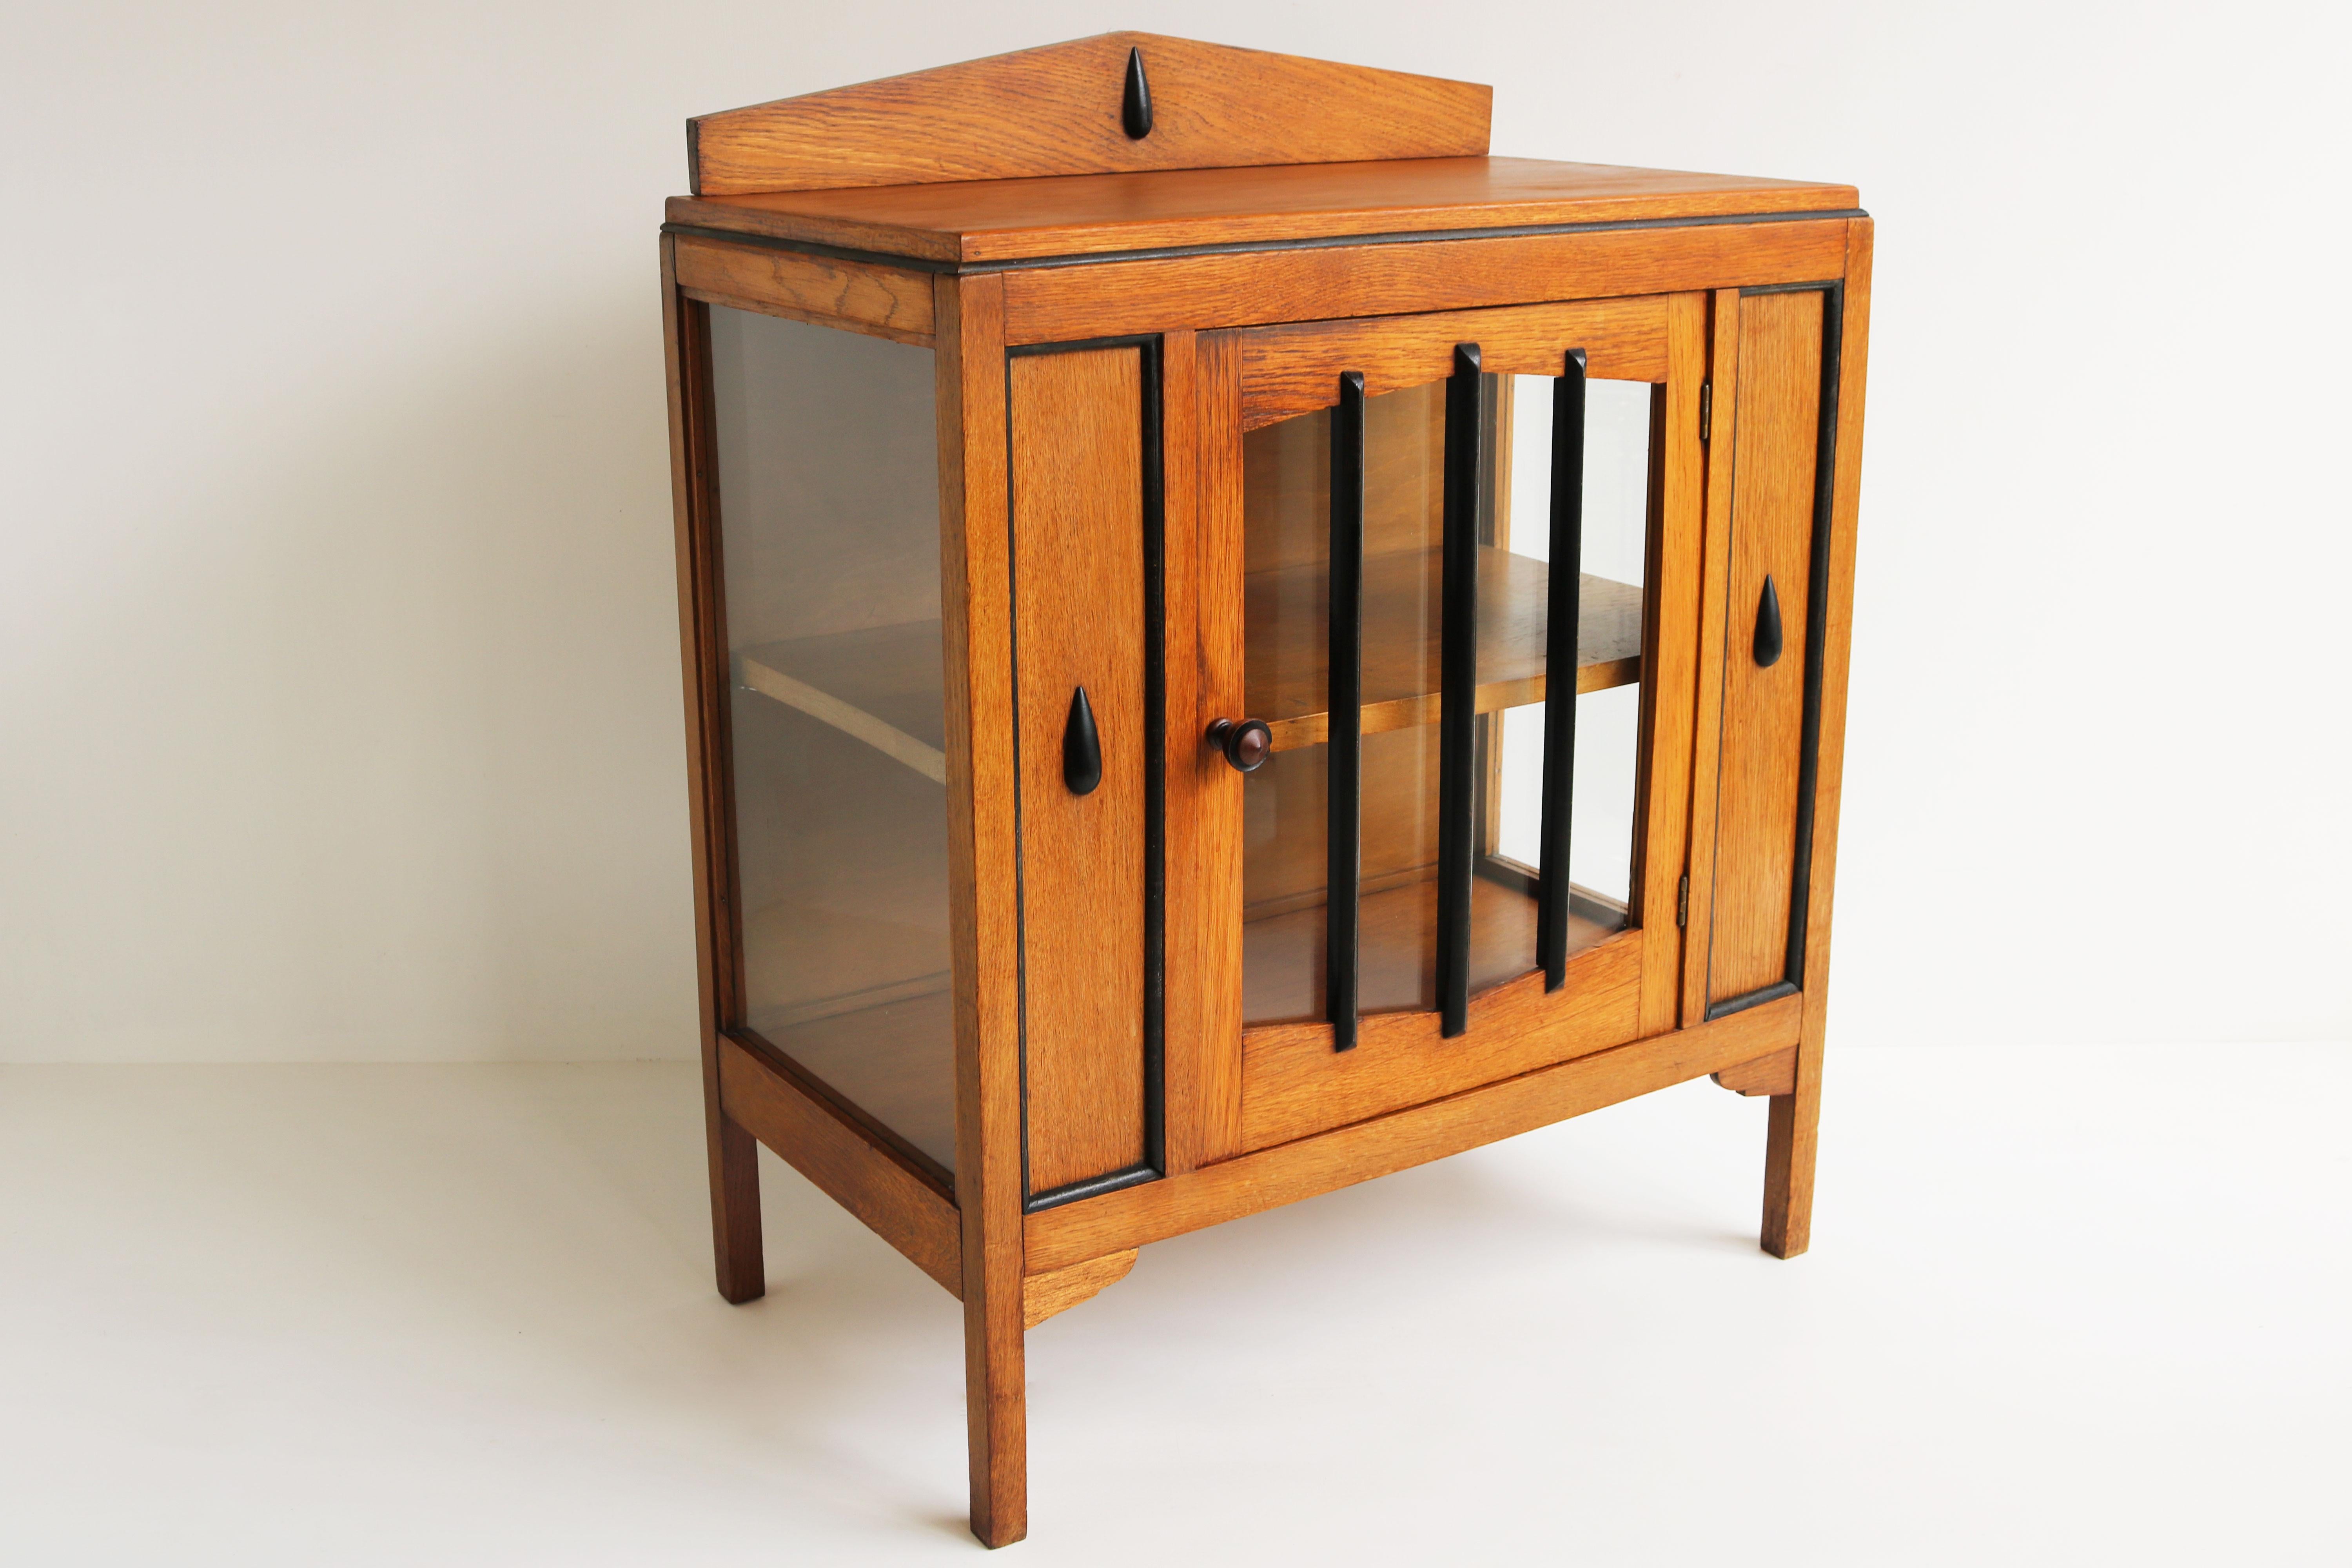 Gorgeous Dutch antique Amsterdam School style tea cabinet. Striking Dutch Art Deco design from the 1920s .
The blonde oak looks amazing with ebony details & typical Amsterdam School Art Deco decoration for example the 3 vertical ebony rods on the